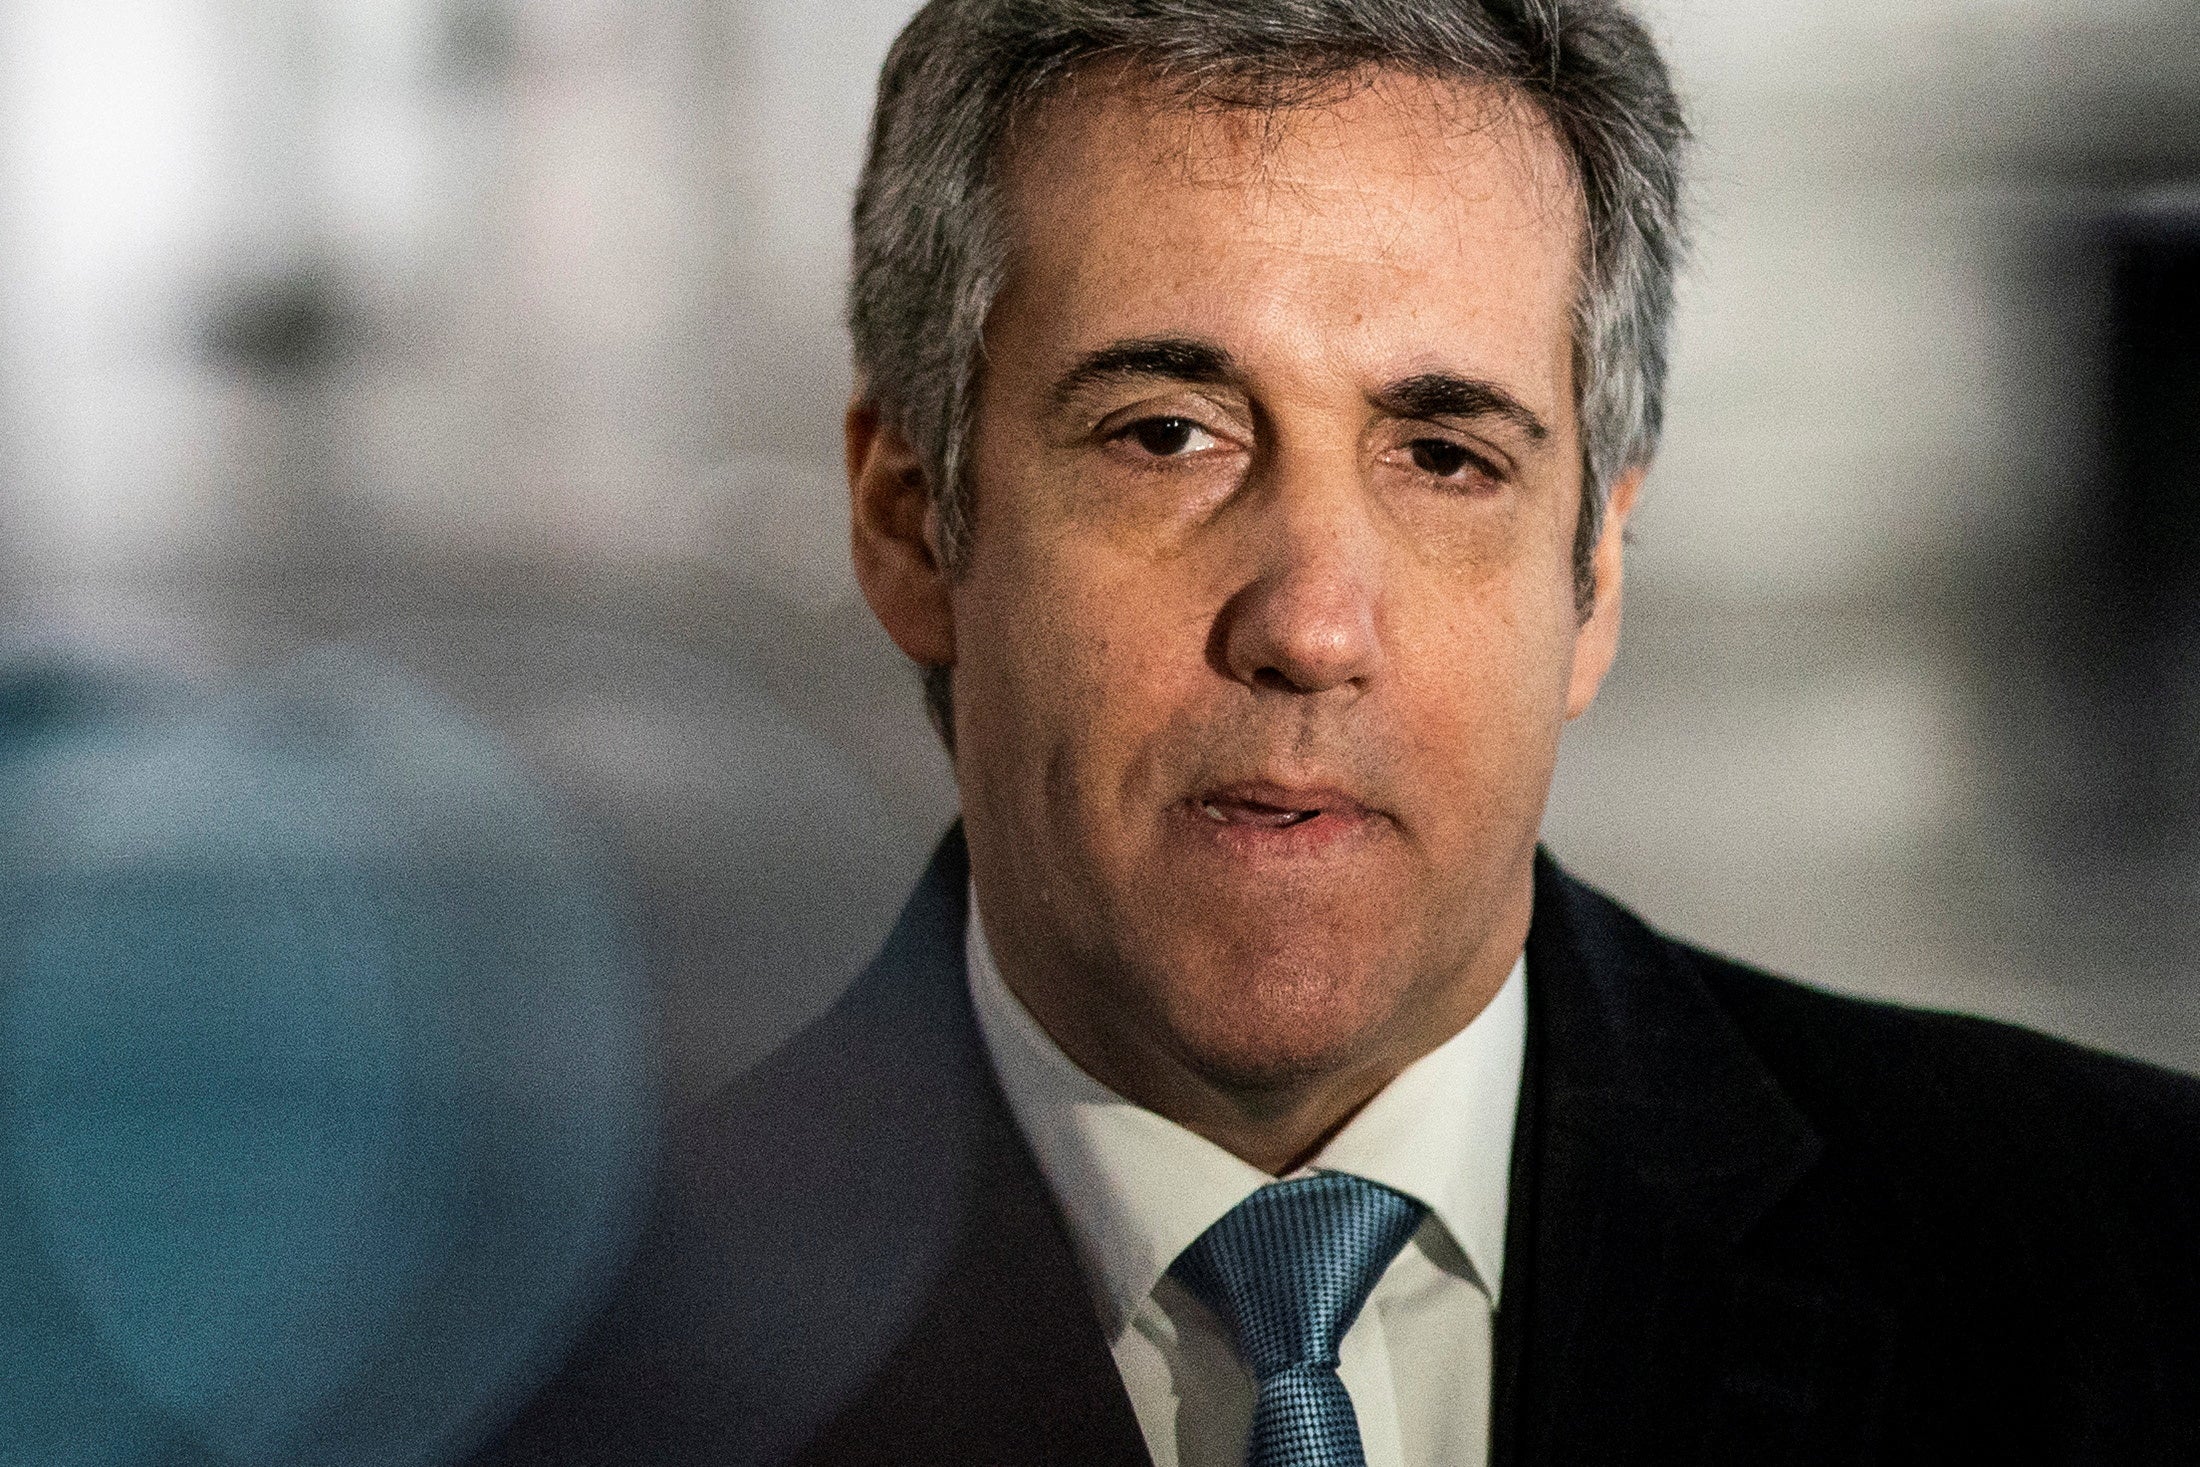 bombshell audio captures trump and cohen discussing hush money ‘catch and kill’ plot